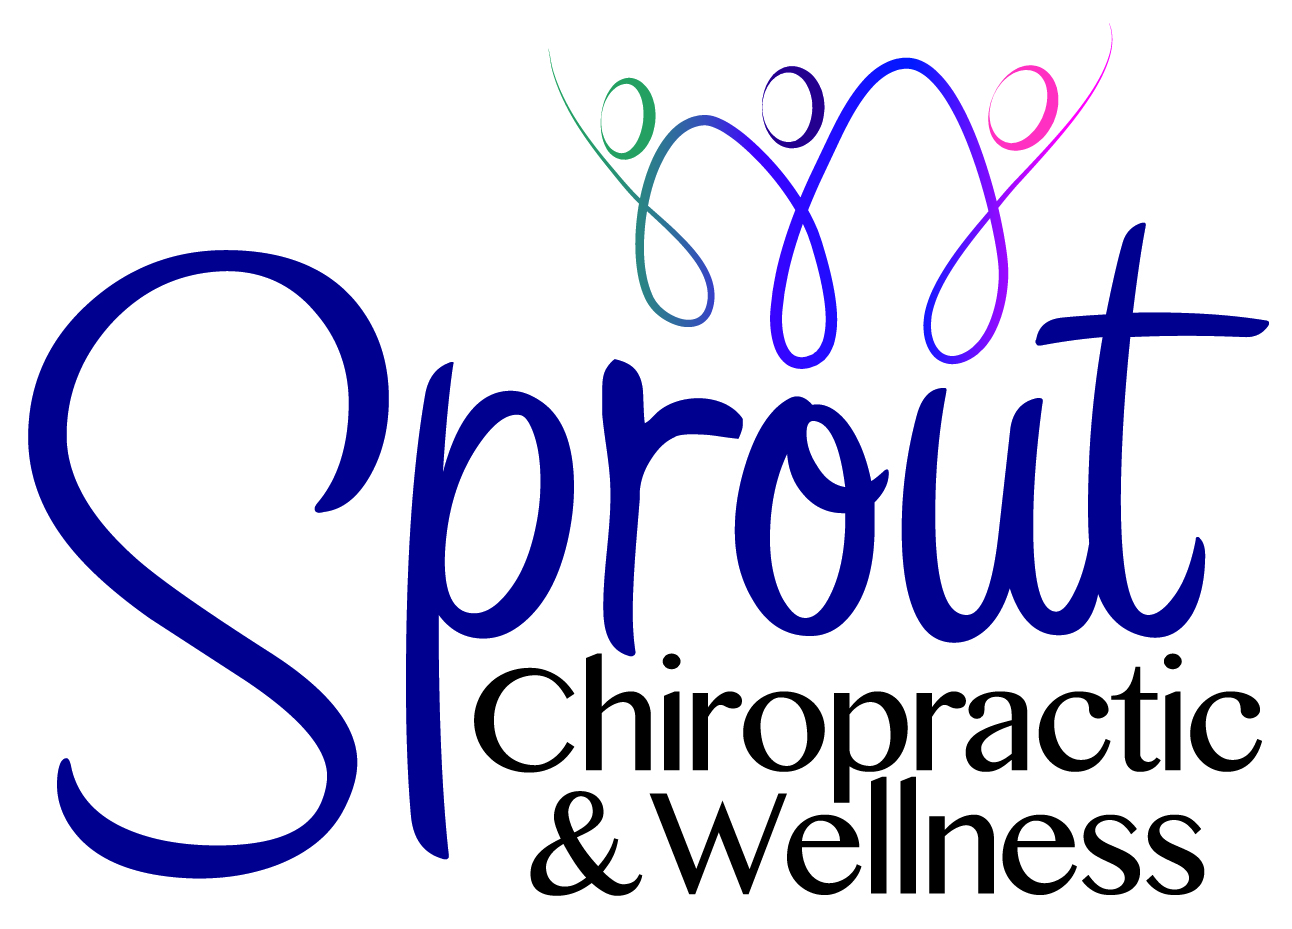 Sprout Chiropractic & Wellness